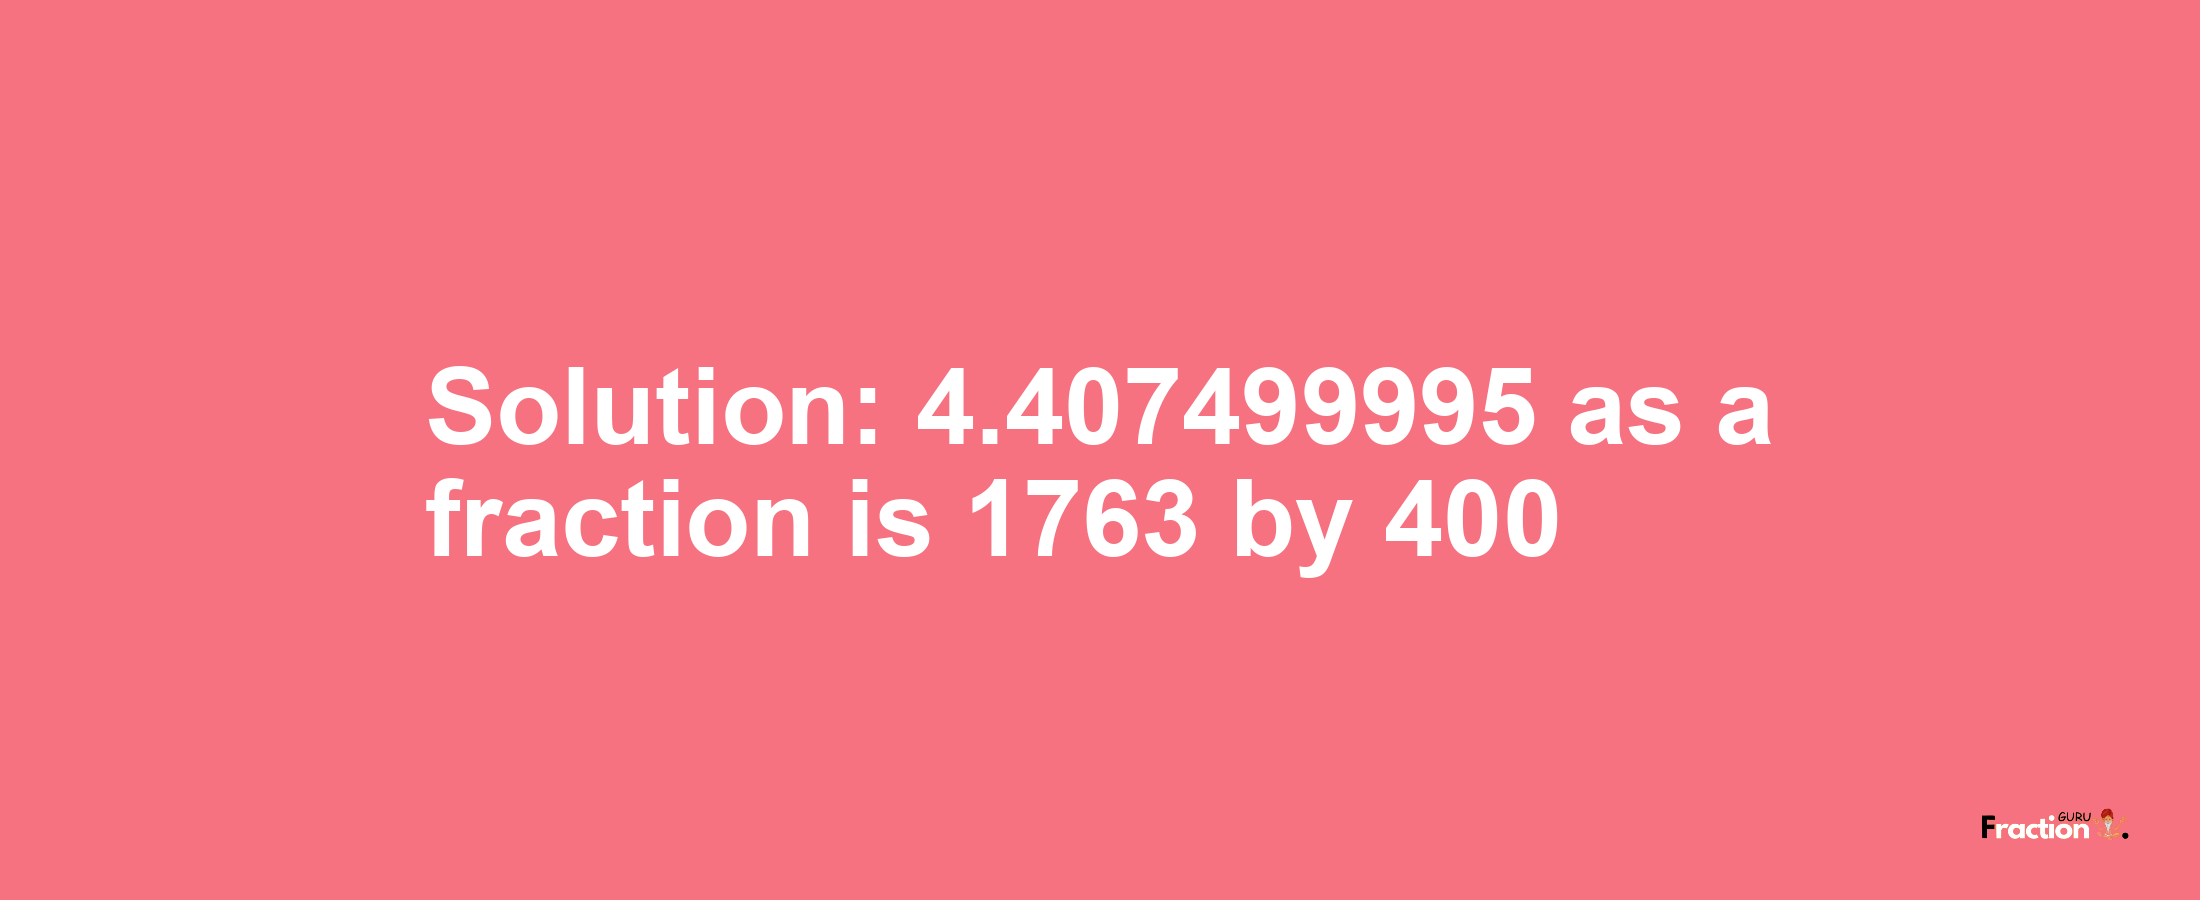 Solution:4.407499995 as a fraction is 1763/400